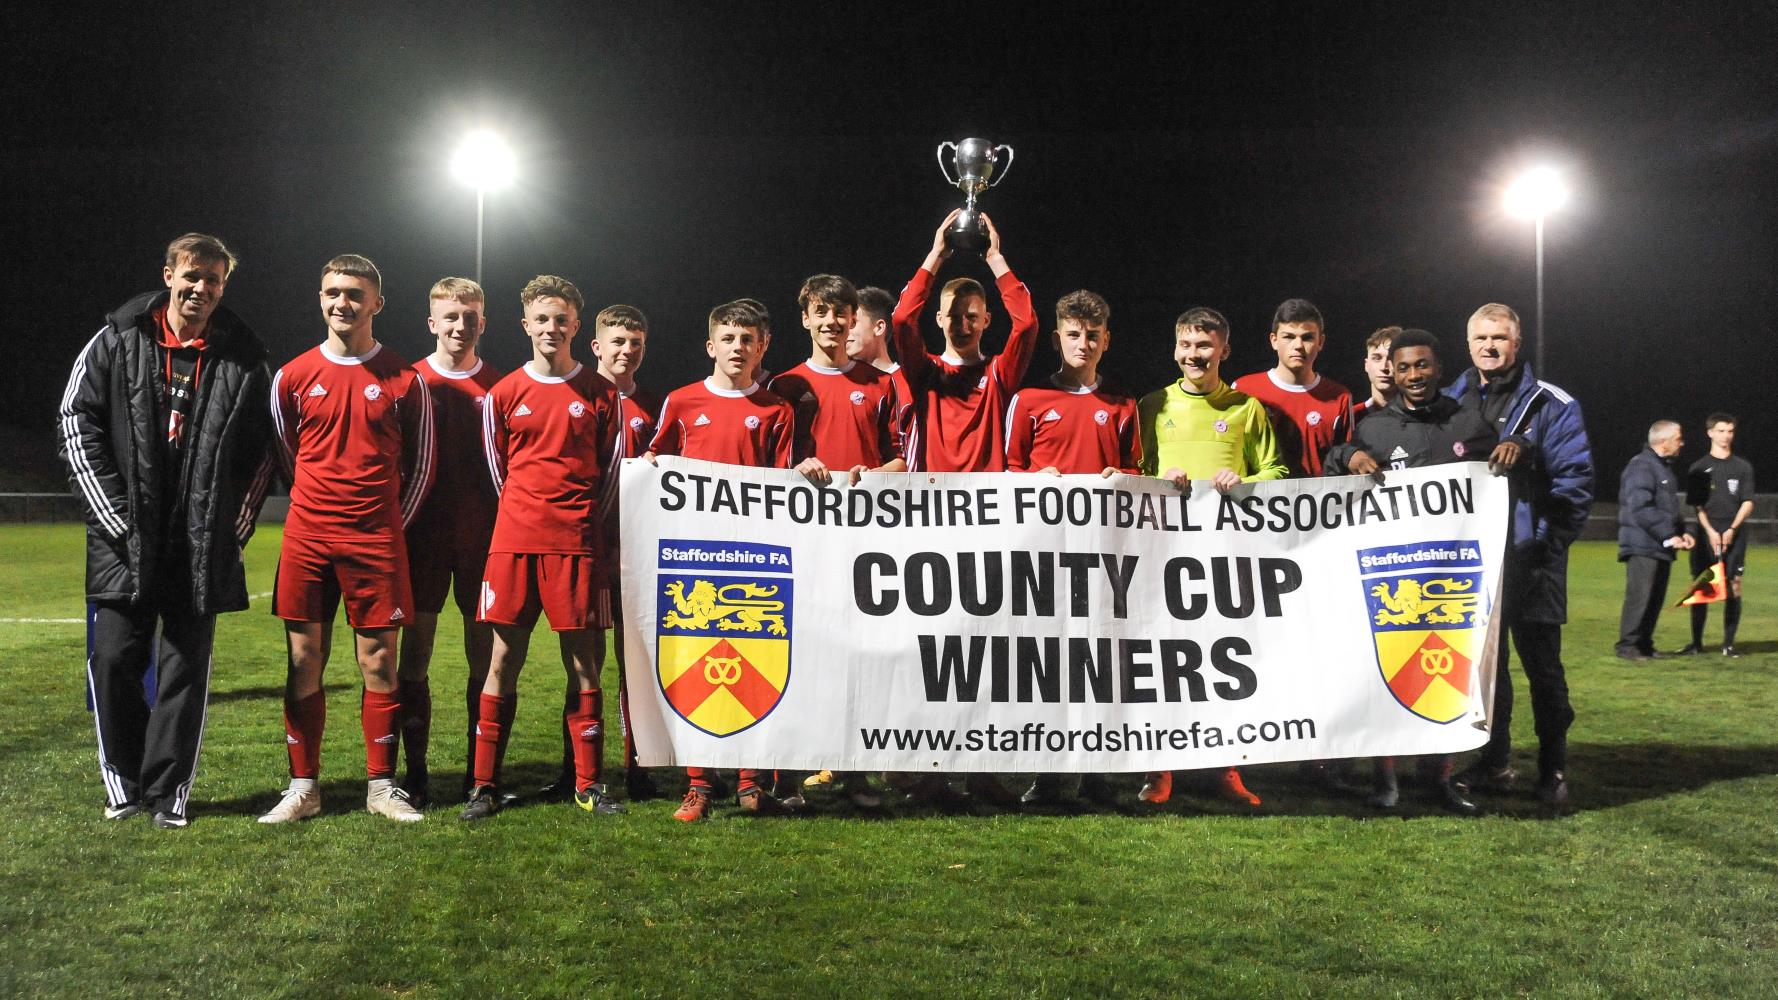 20-facts-about-staffordshire-football